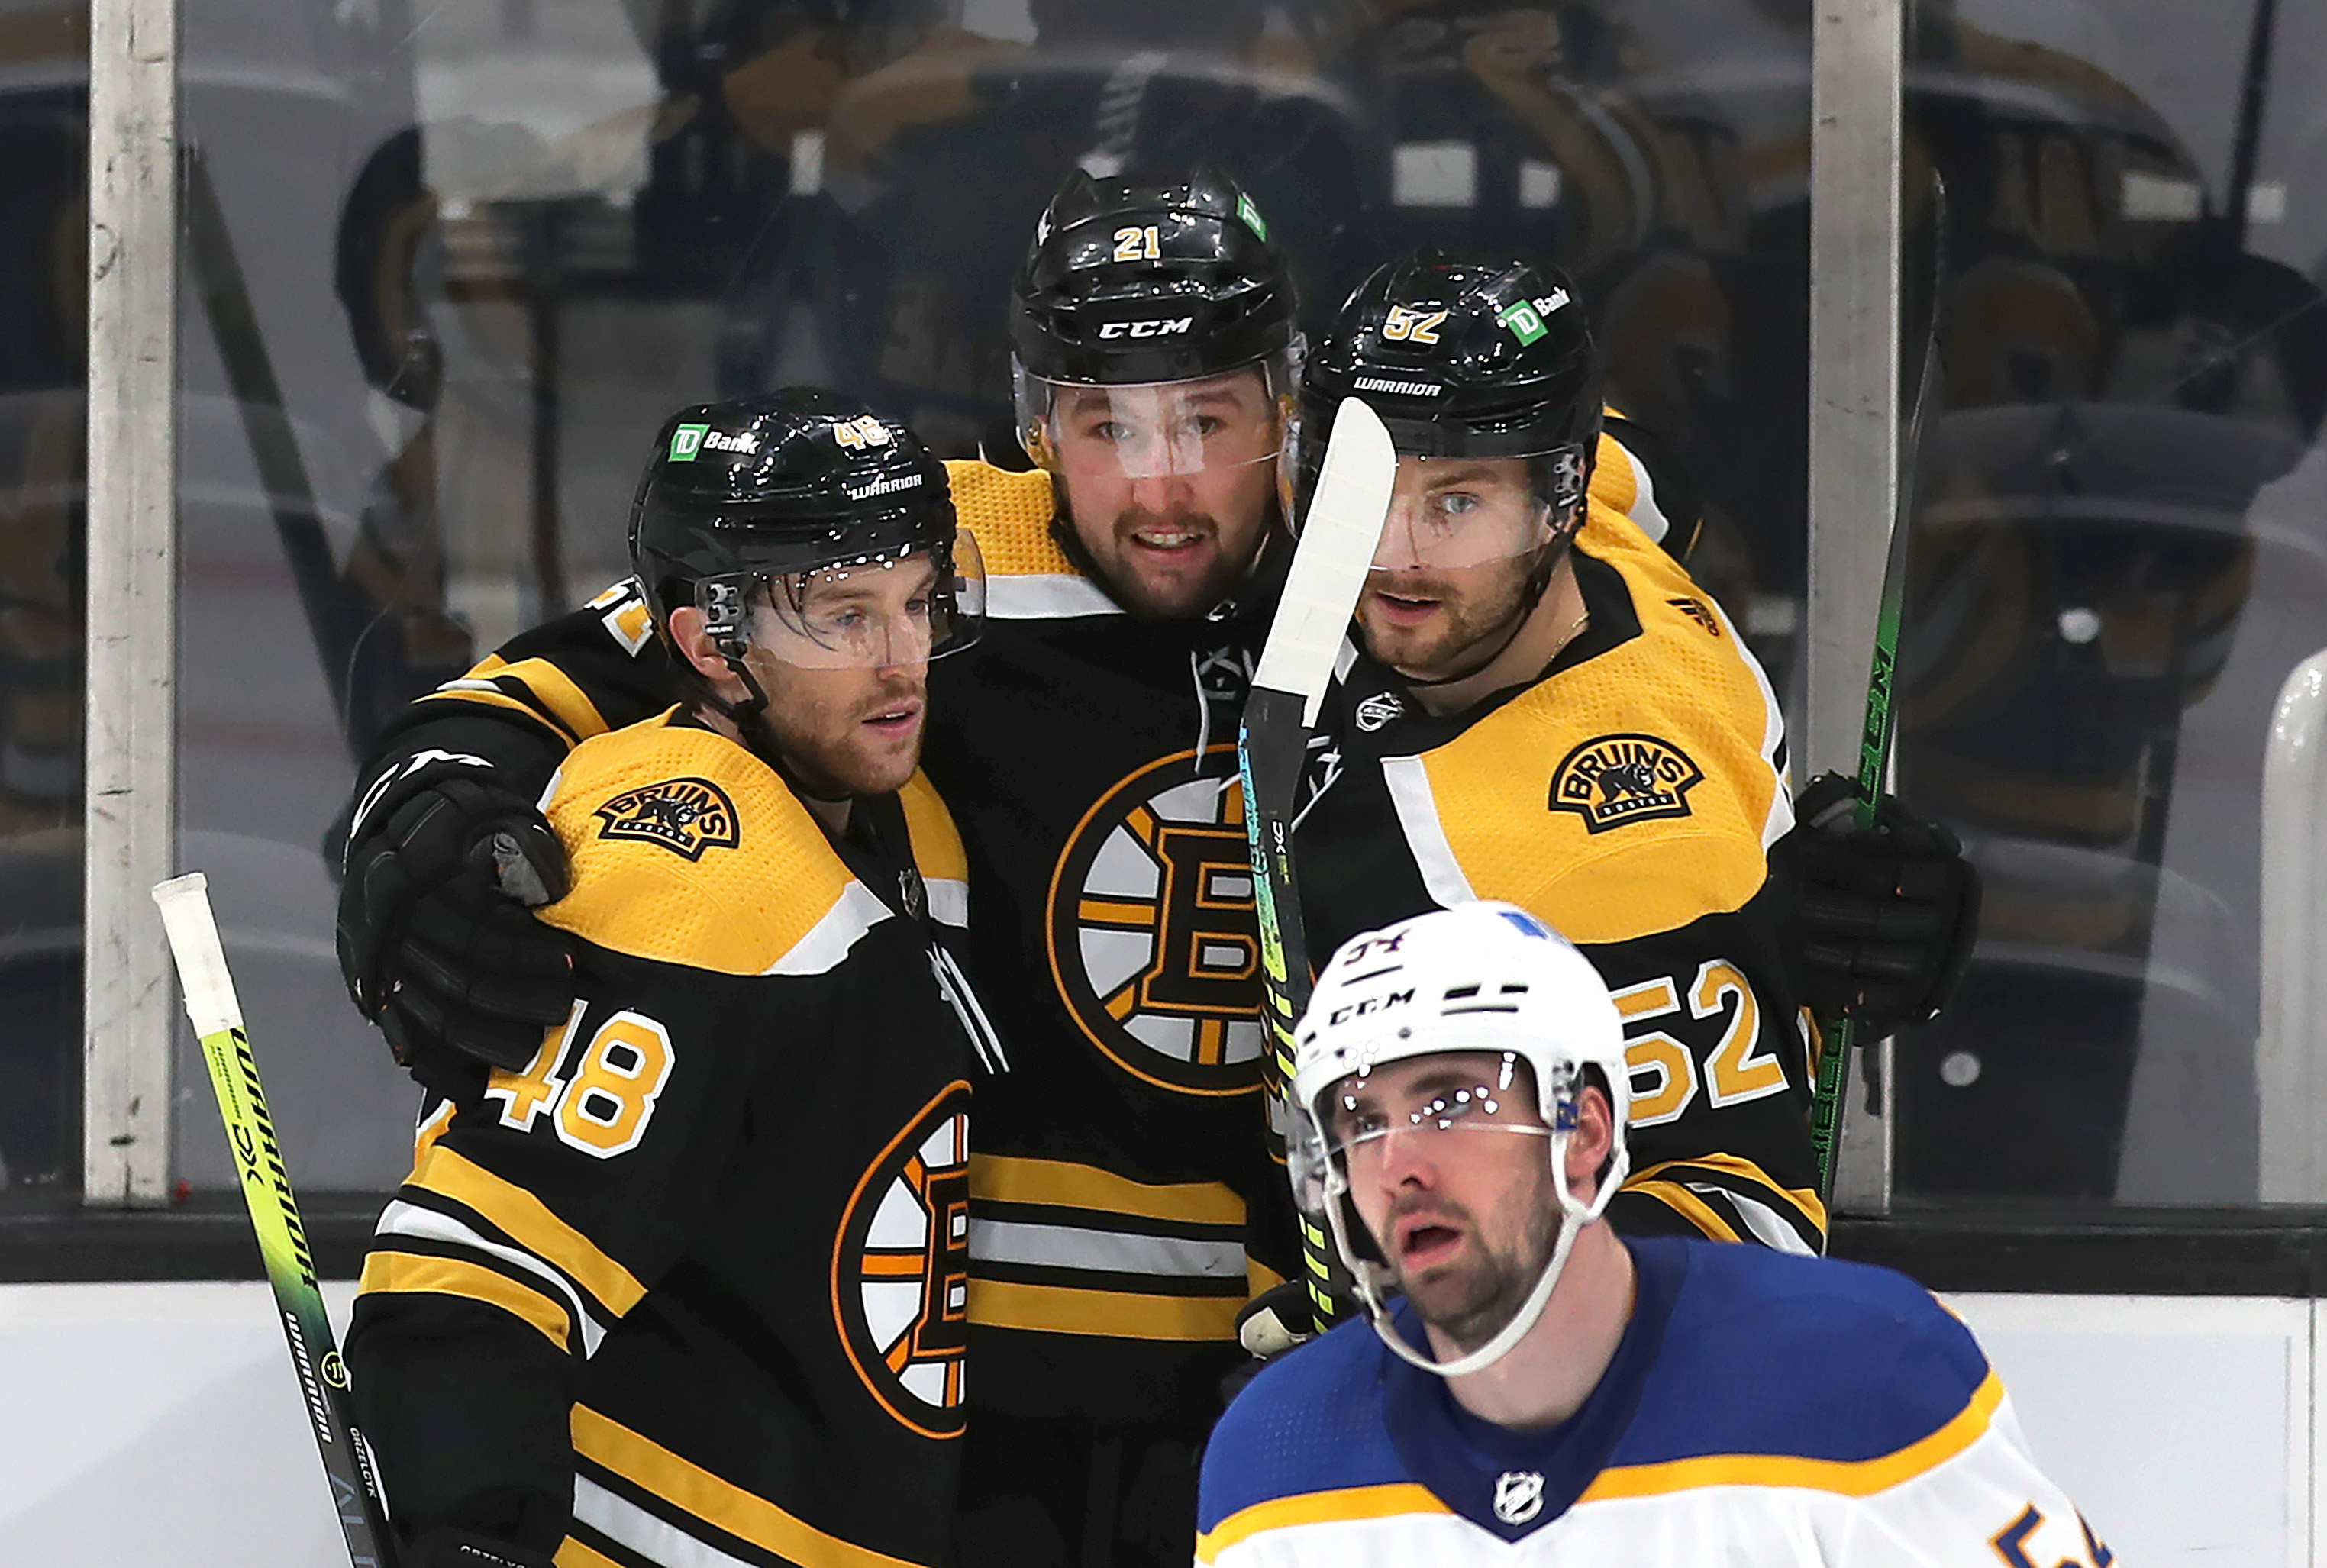 Bruins extend agreement to have their games broadcast on The Sports Hub